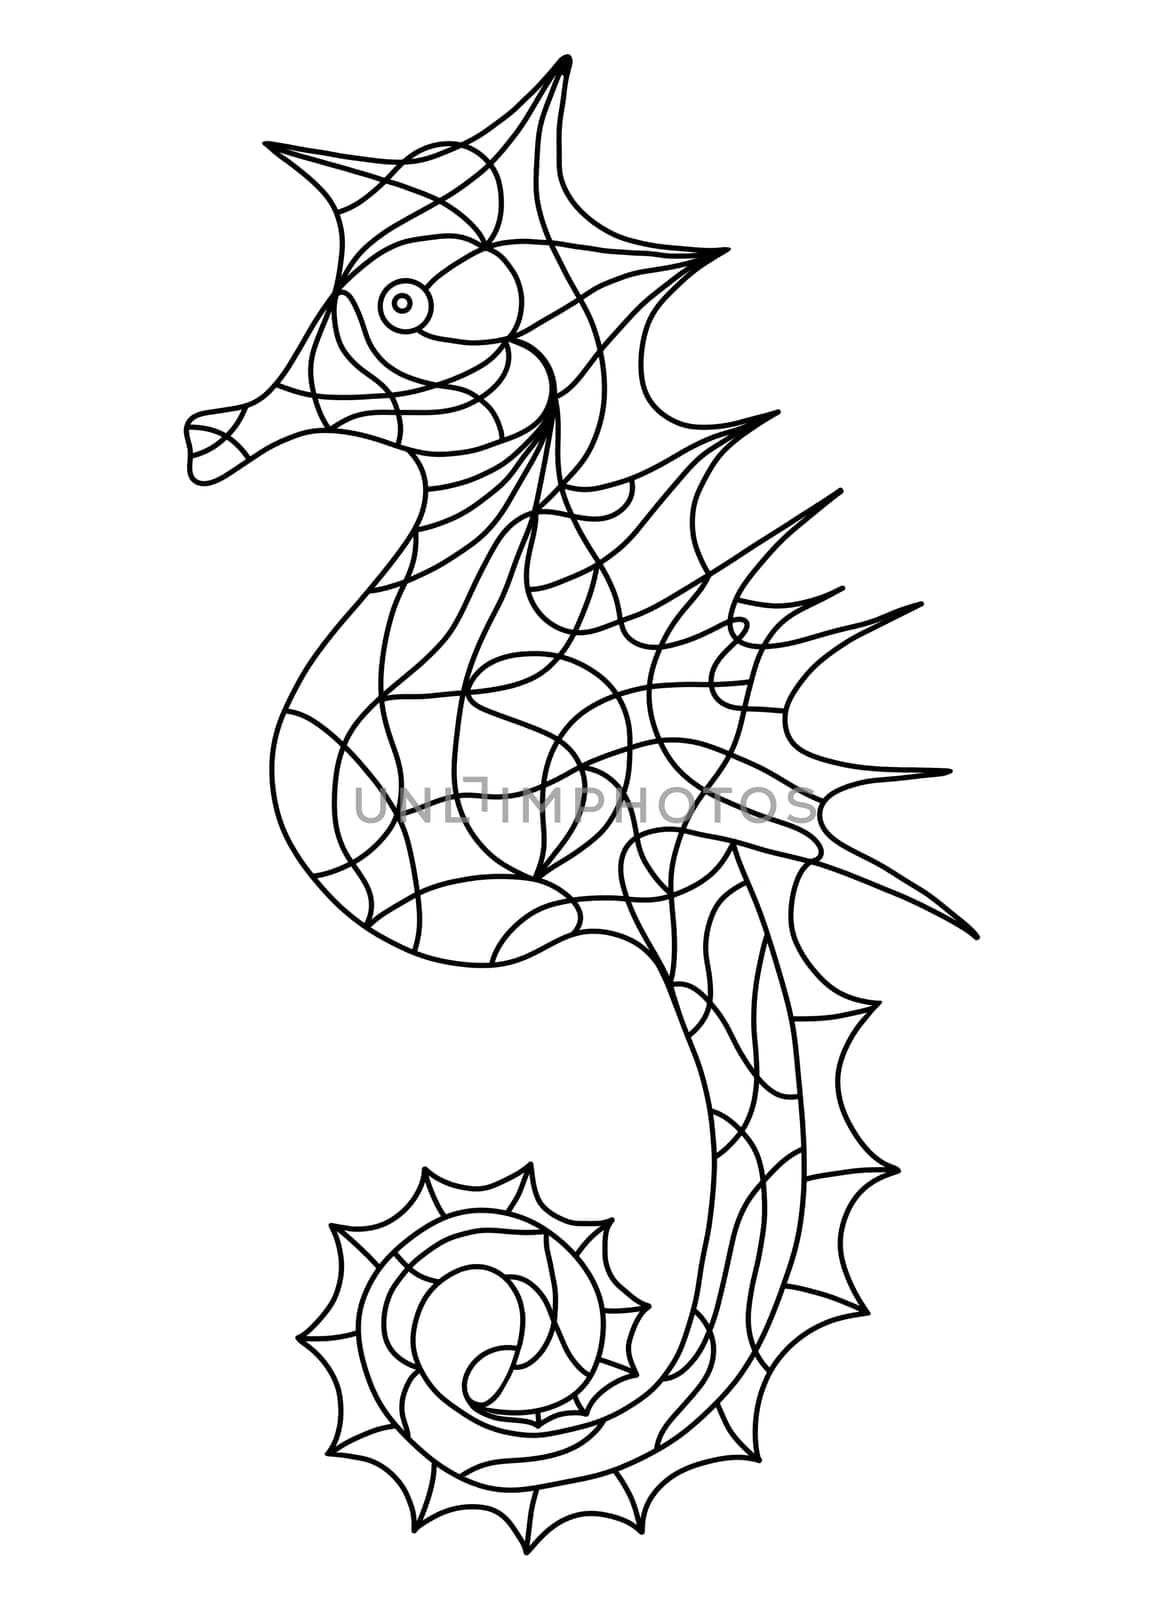 Sea Horse Isolated Logo. Hand Drawn Black and White Seahorse Illustration. Sea Horse in Stained Glass Window Style. Coloring Book Pages for Adult.